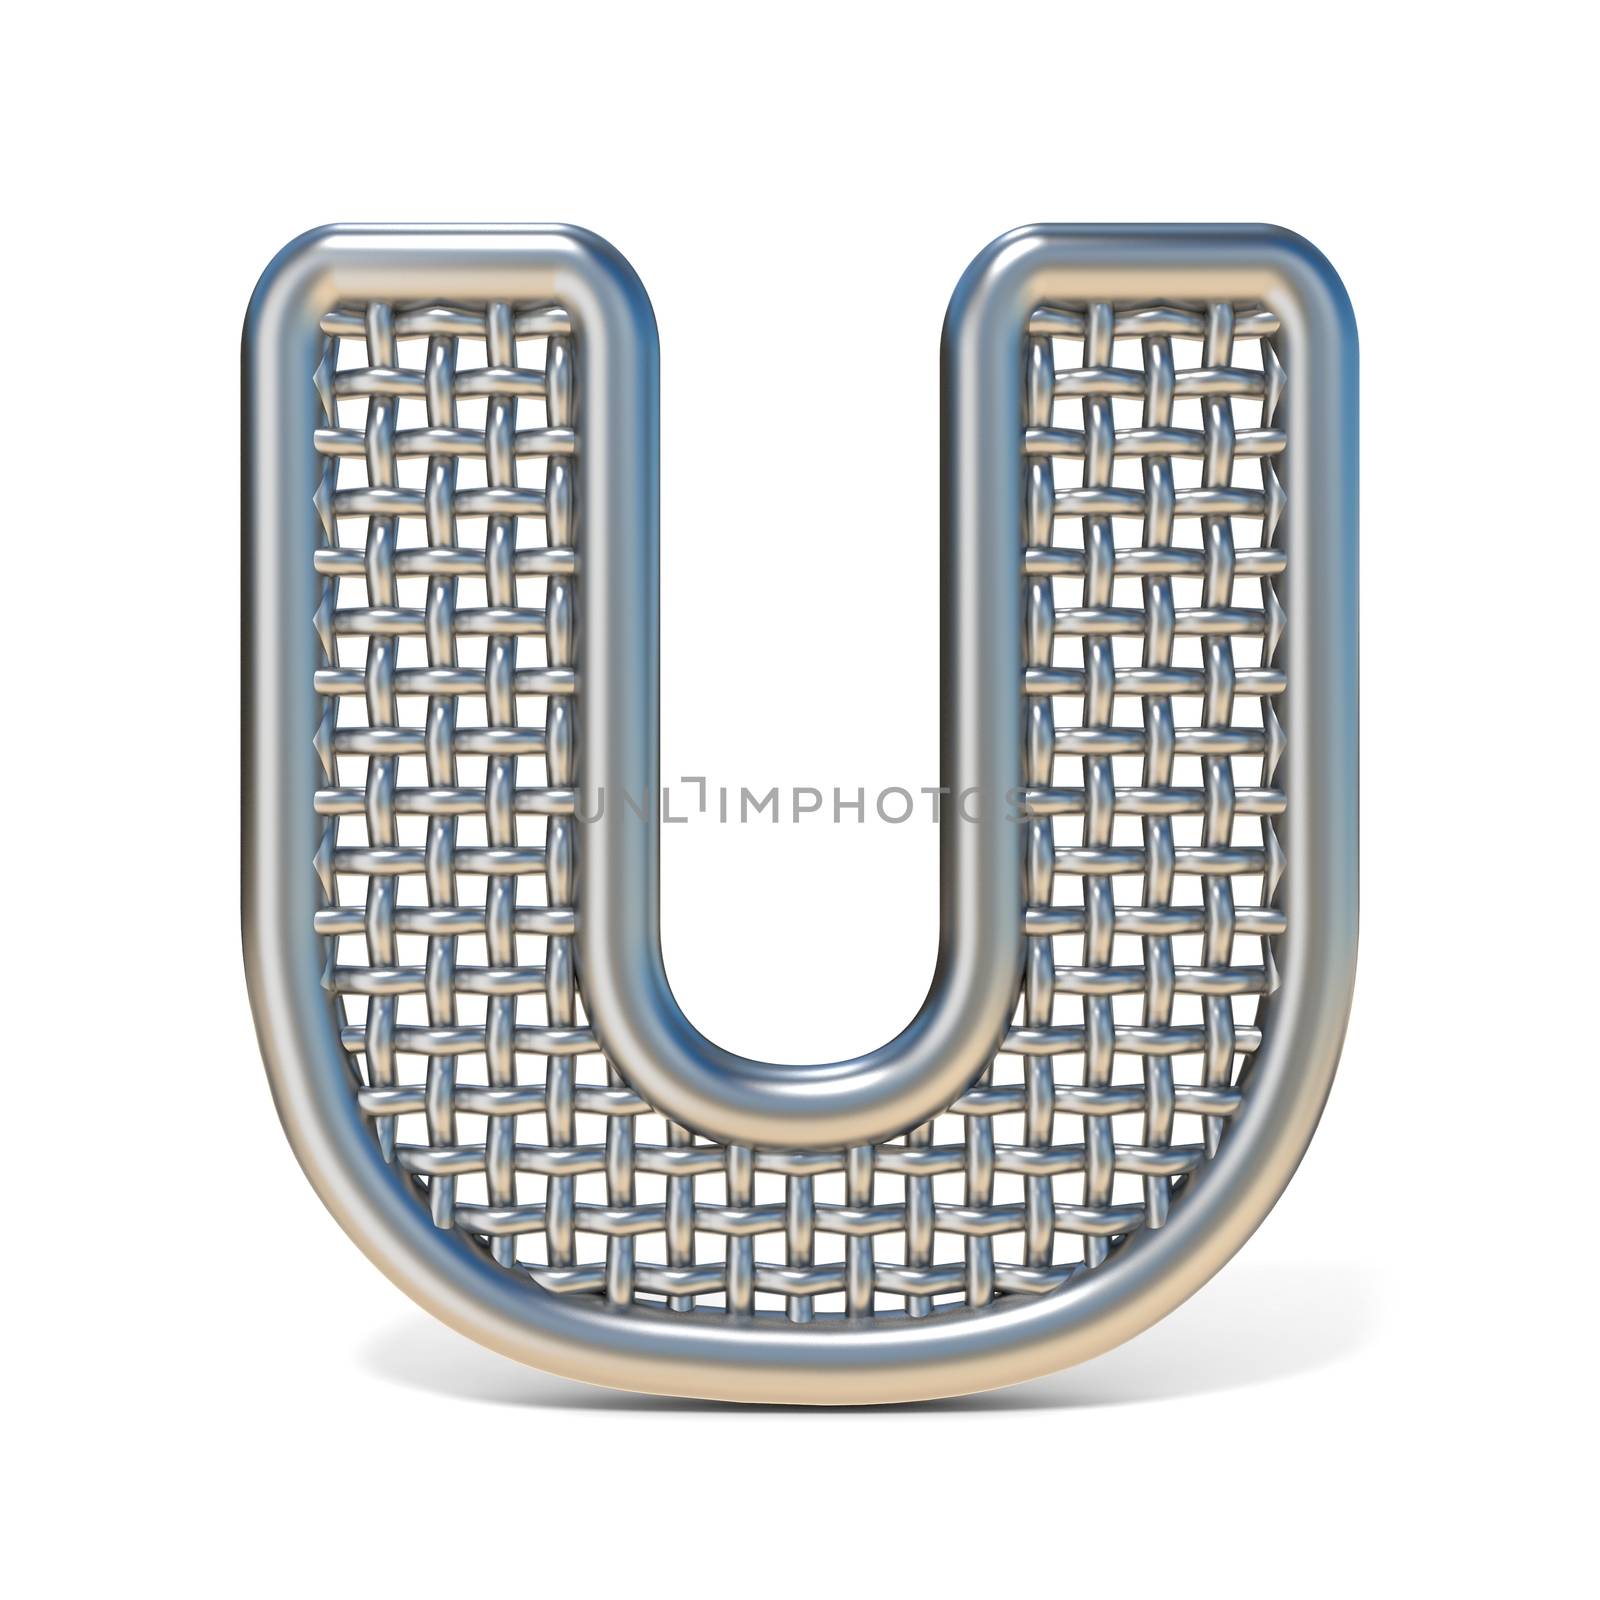 Outlined metal wire mesh font LETTER U 3D render illustration isolated on white background